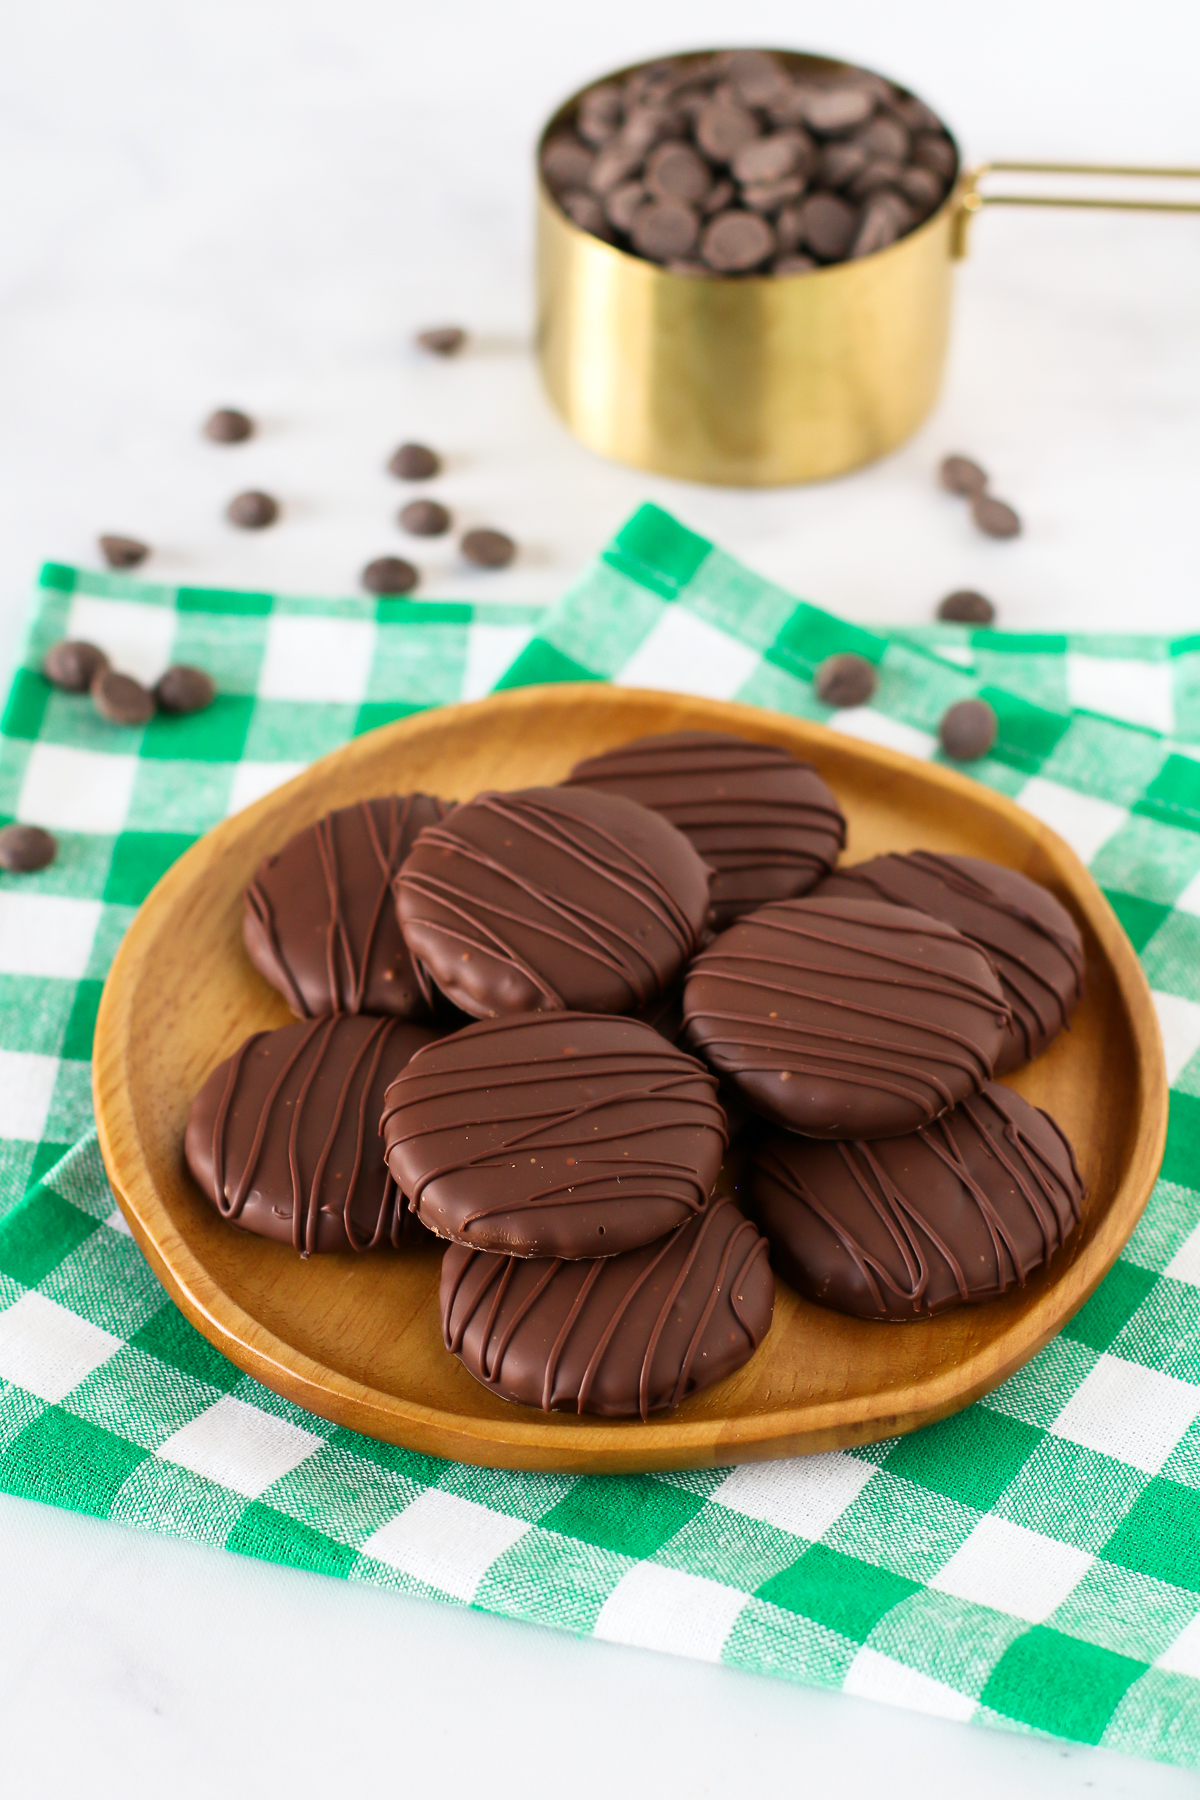 Gluten Free Vegan Thin Mint Cookies. You know you want a bite of one of these chocolate-covered chocolate mint cookies!